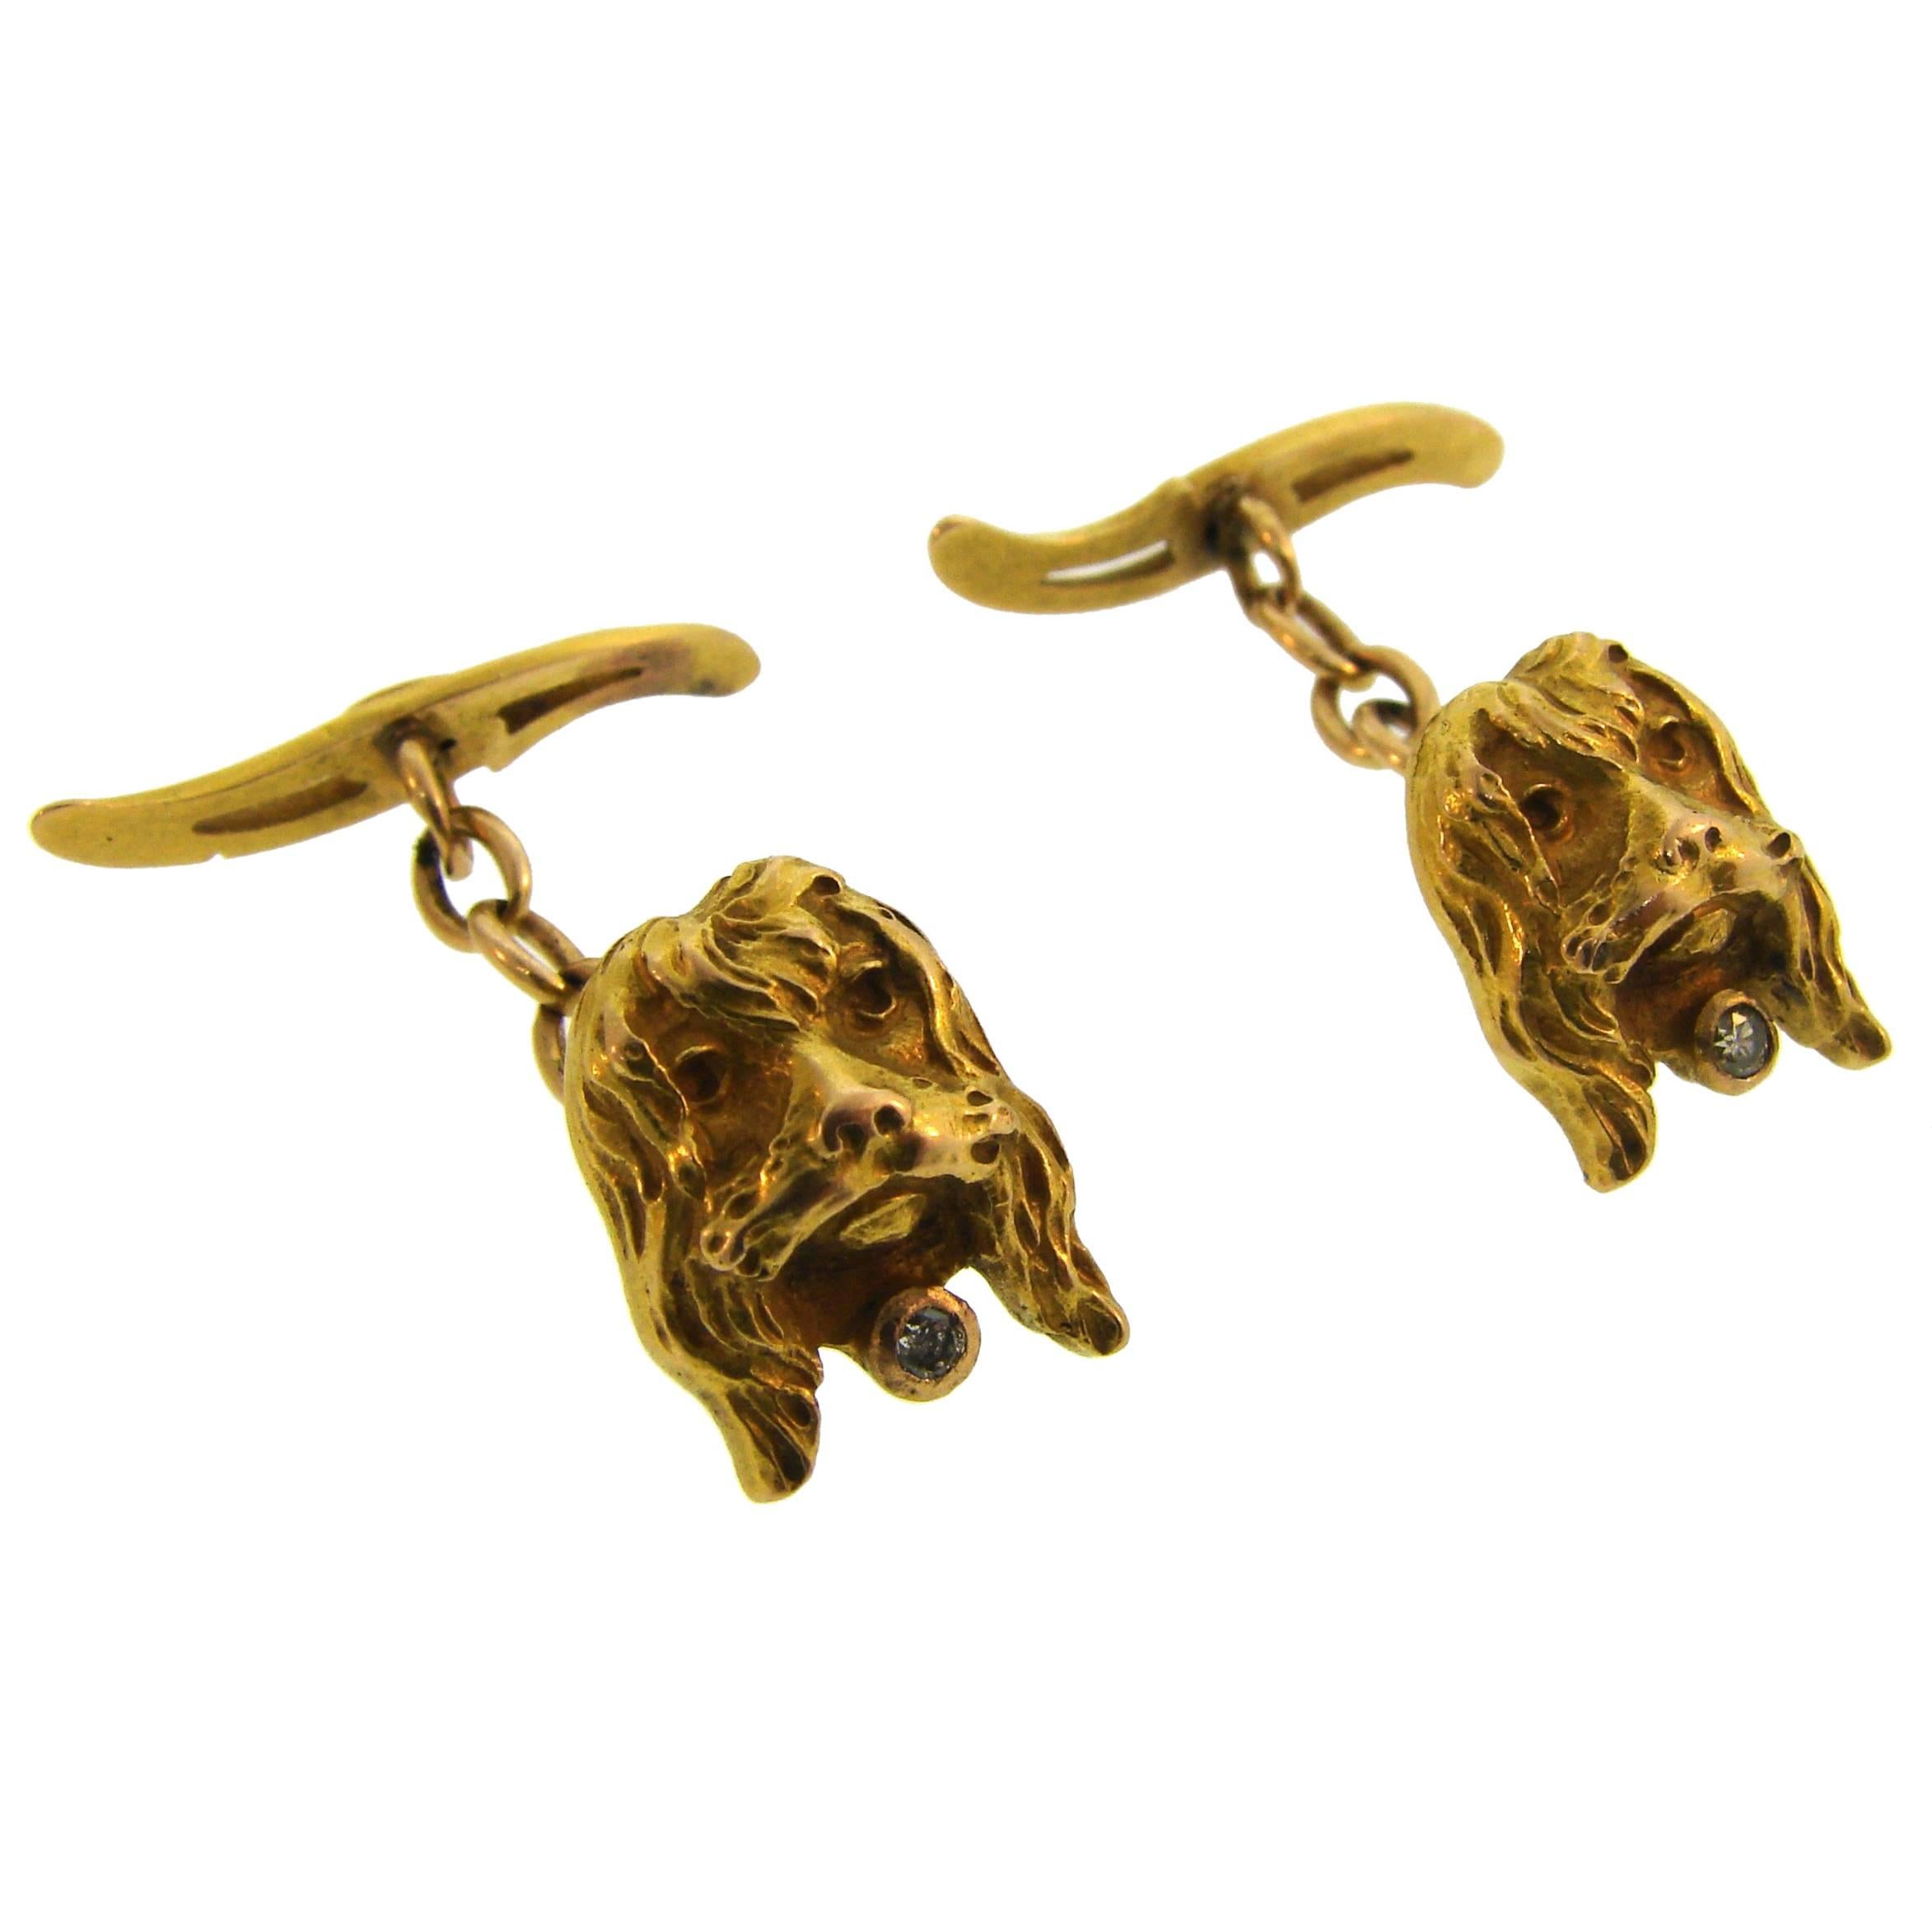 Cute and fun spaniel dog cufflinks. Elegant and wearable, the vintage cufflinks are a great addition to your jewelry and accessories collection. 
Made of 14 karat (tested) yellow gold and accented with round faceted diamond.
The spaniel's heads